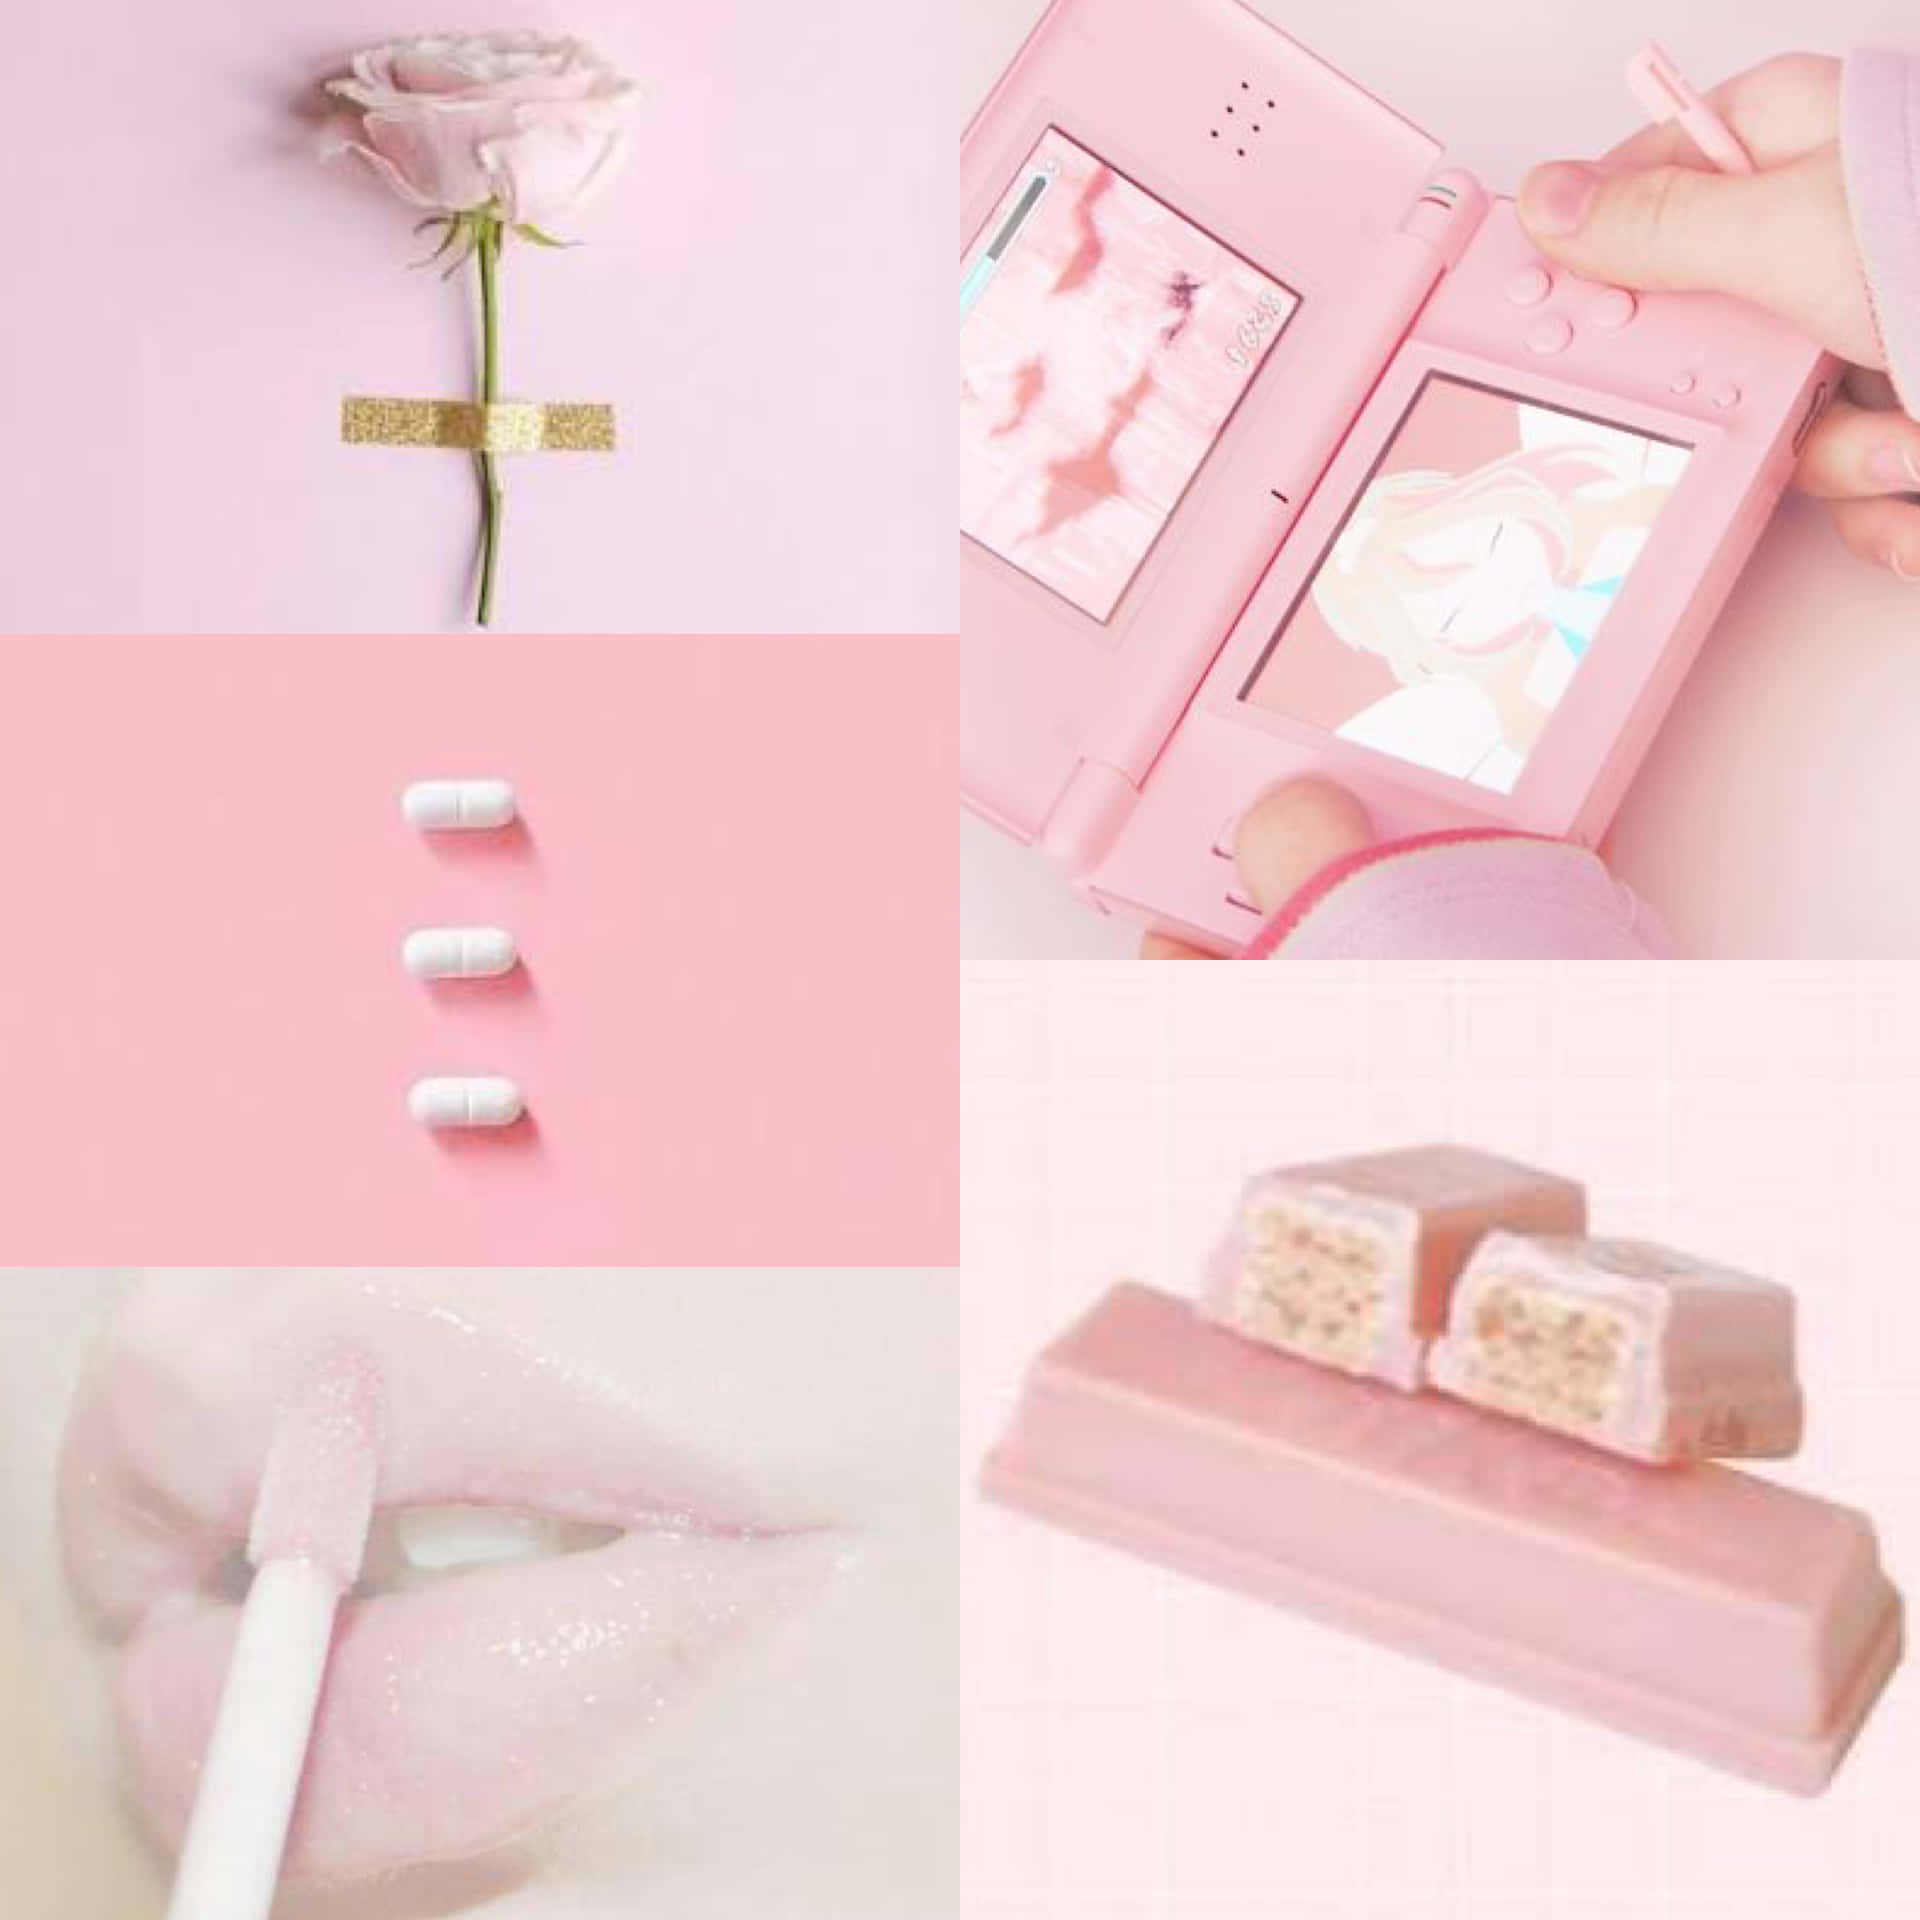 Enjoy the beauty of pastel pink aesthetic.